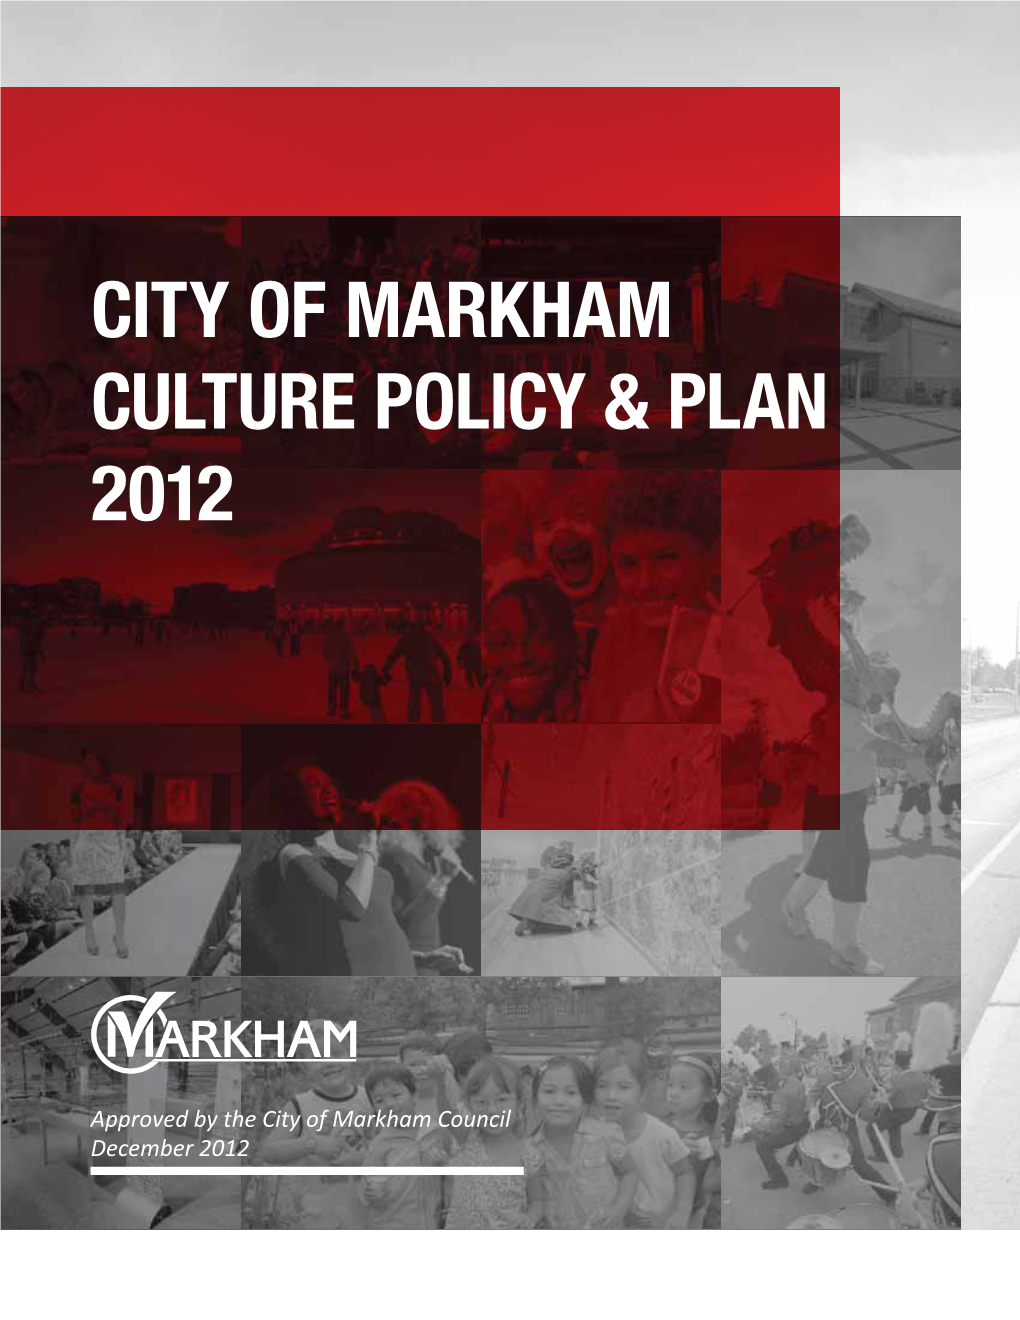 City of Markham Culture Policy & Plan 2012